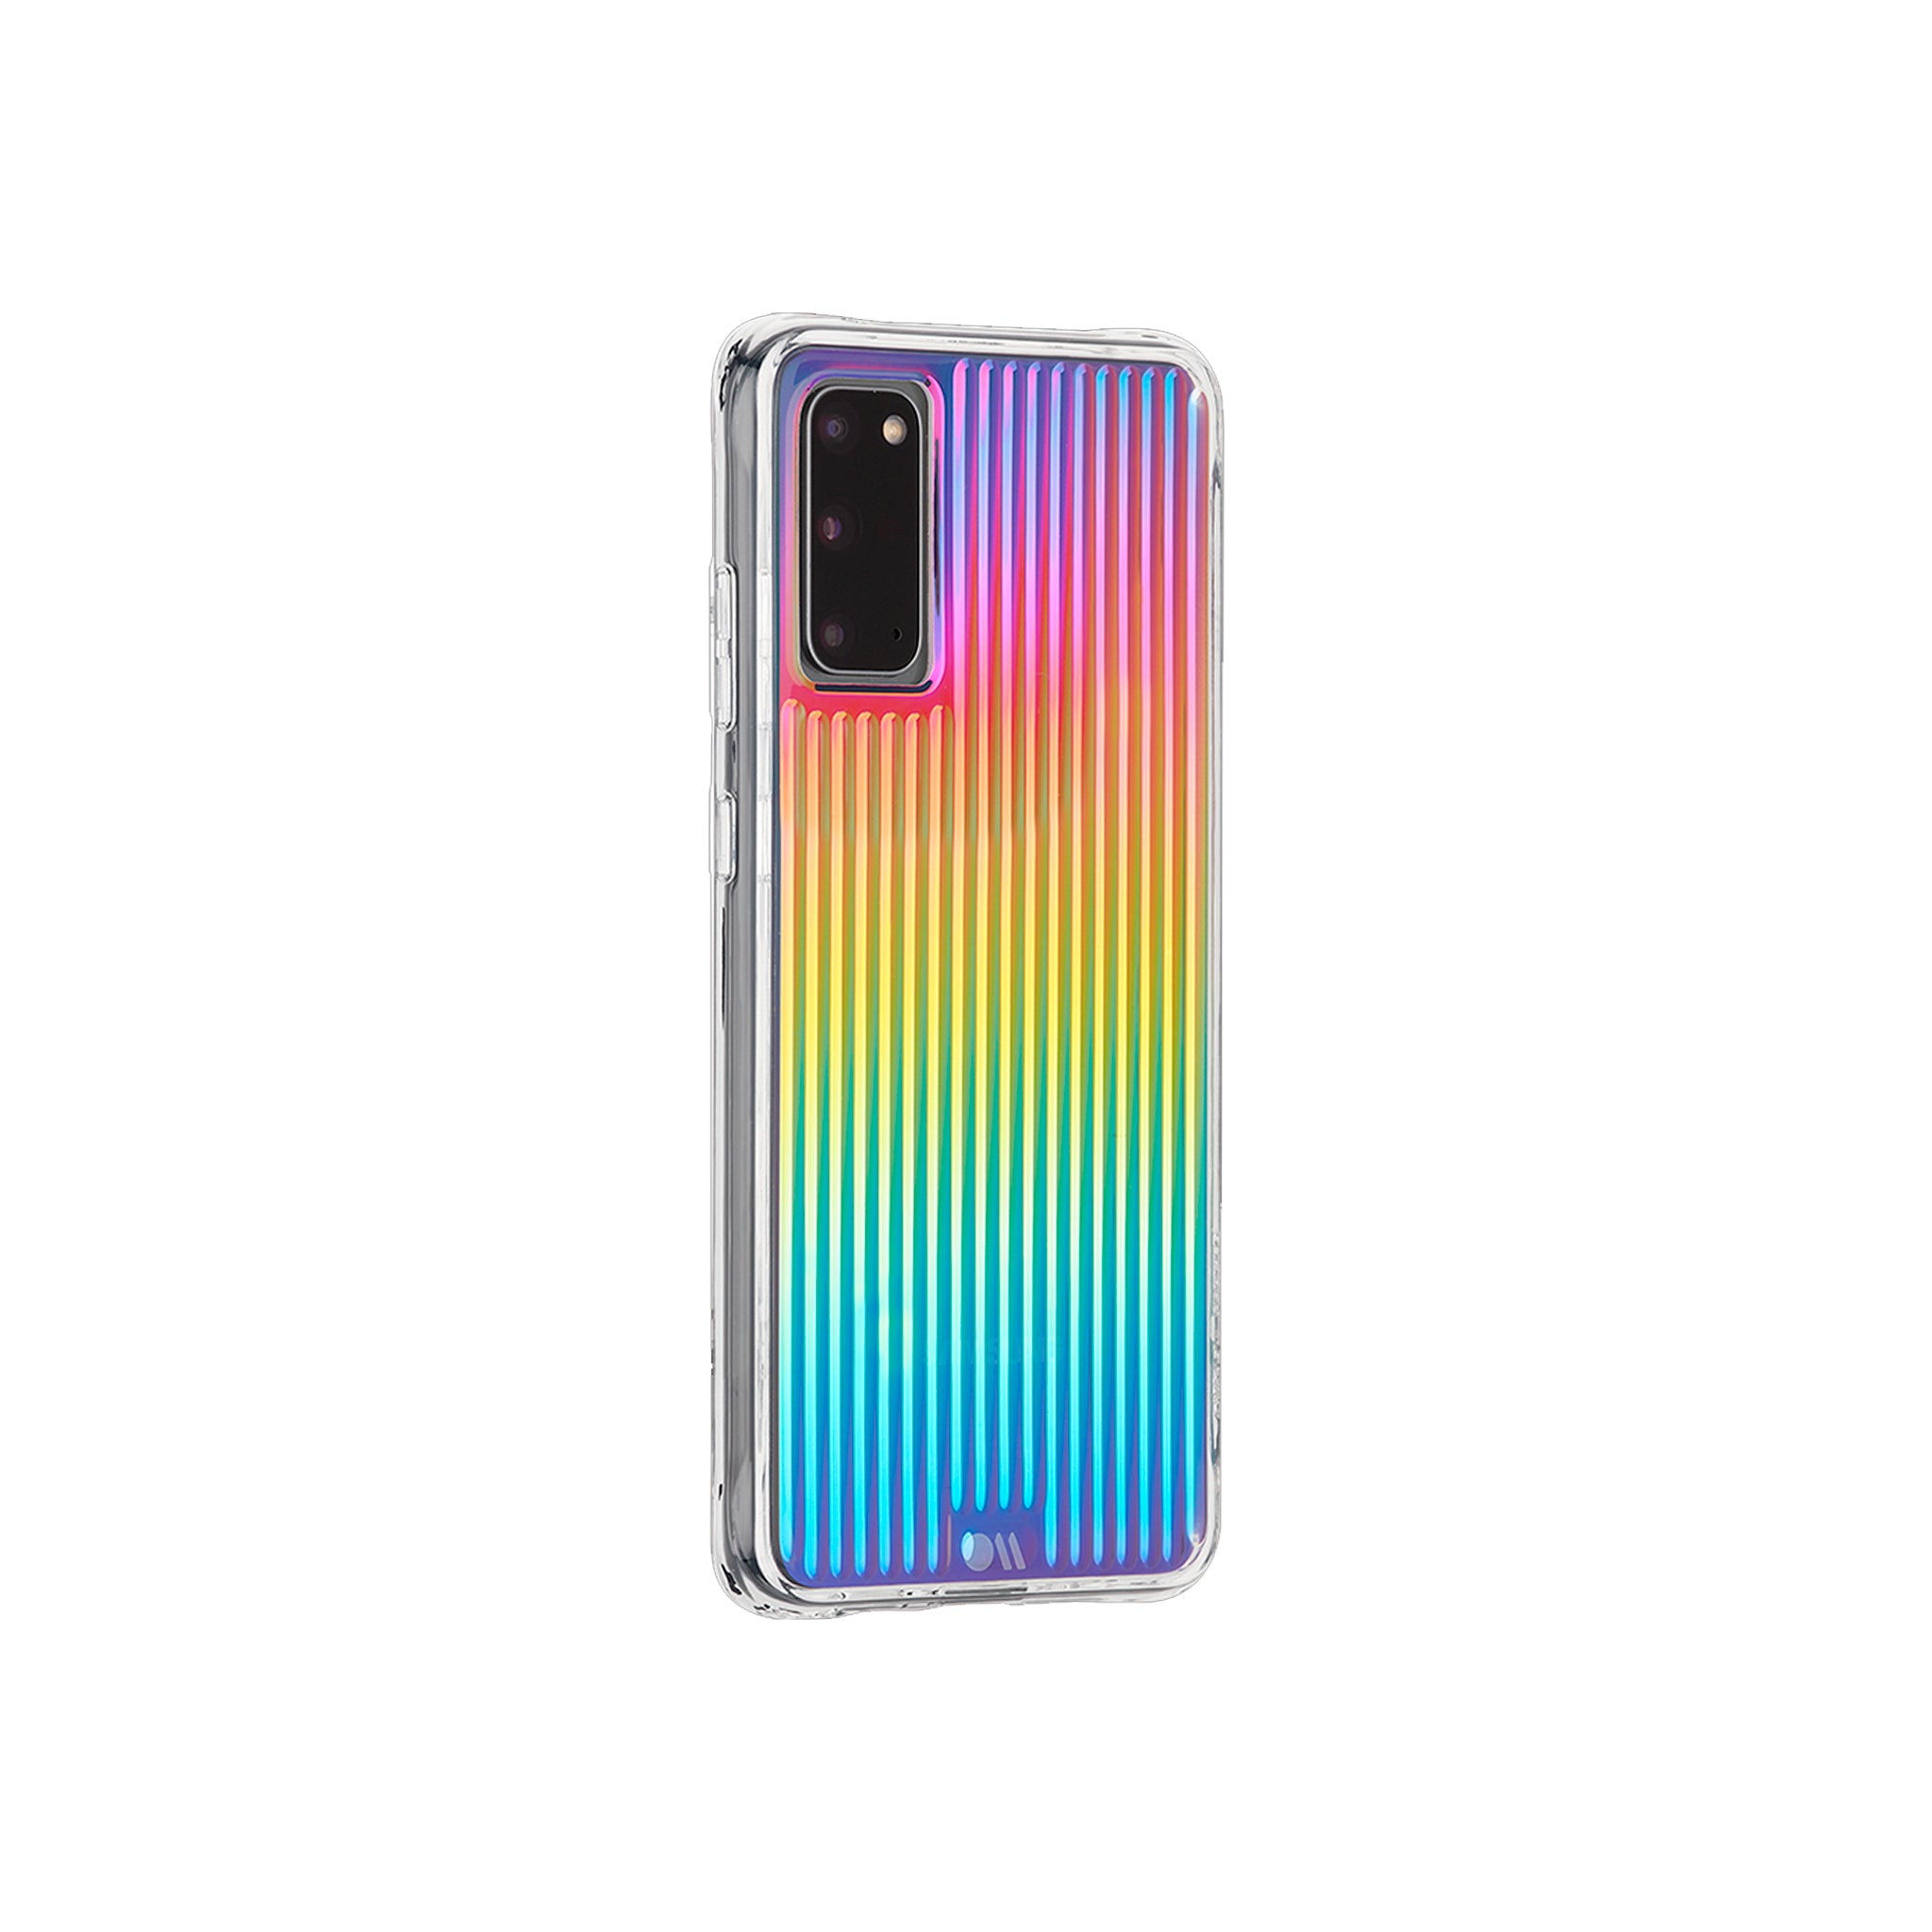 Case-mate - Tough Groove Case For Samsung Galaxy S20 / S20 5g Uw - Iridescent